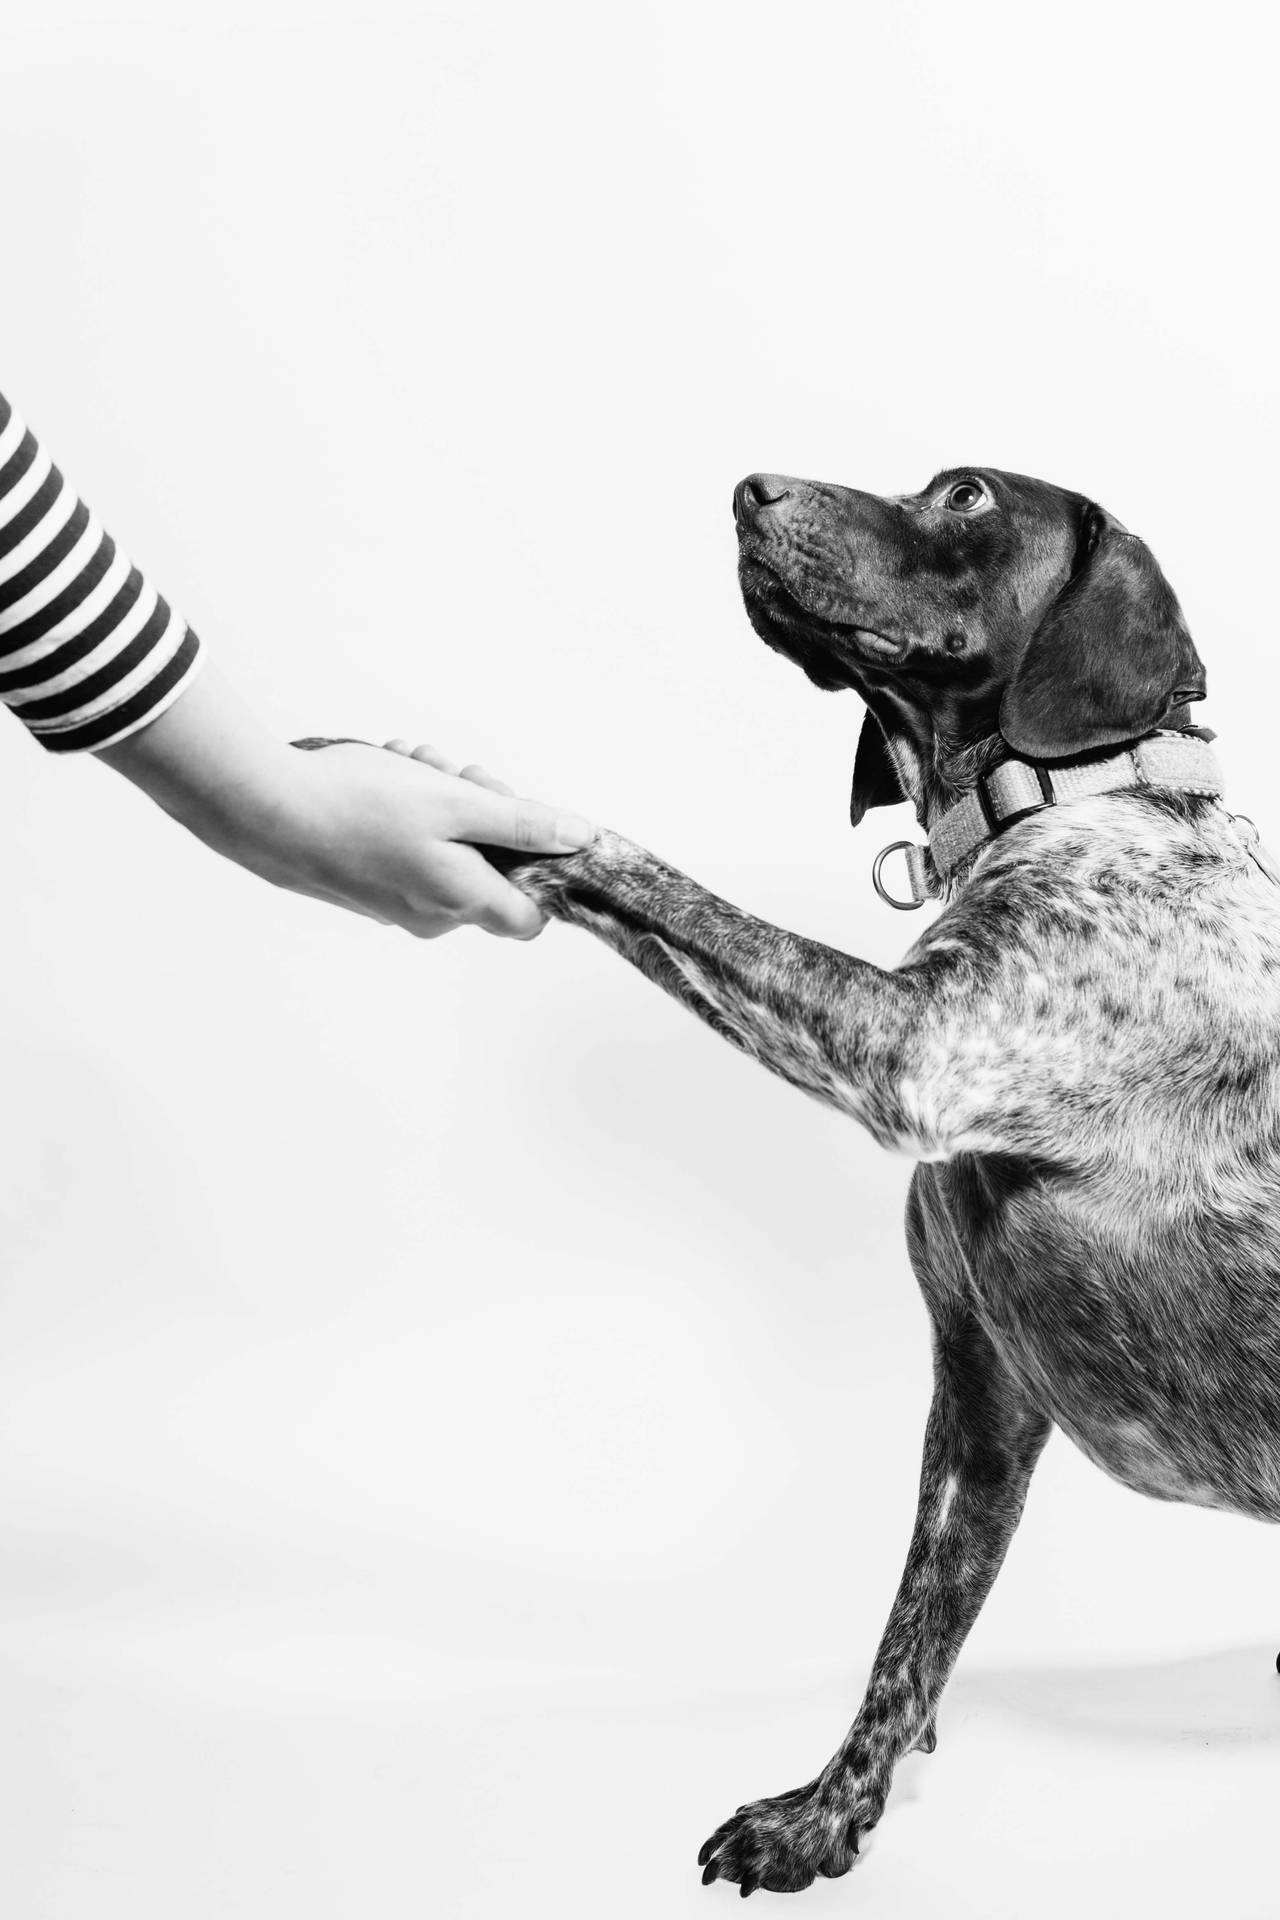 A Black And White Moment - Human Hand And Dog Paw Wallpaper